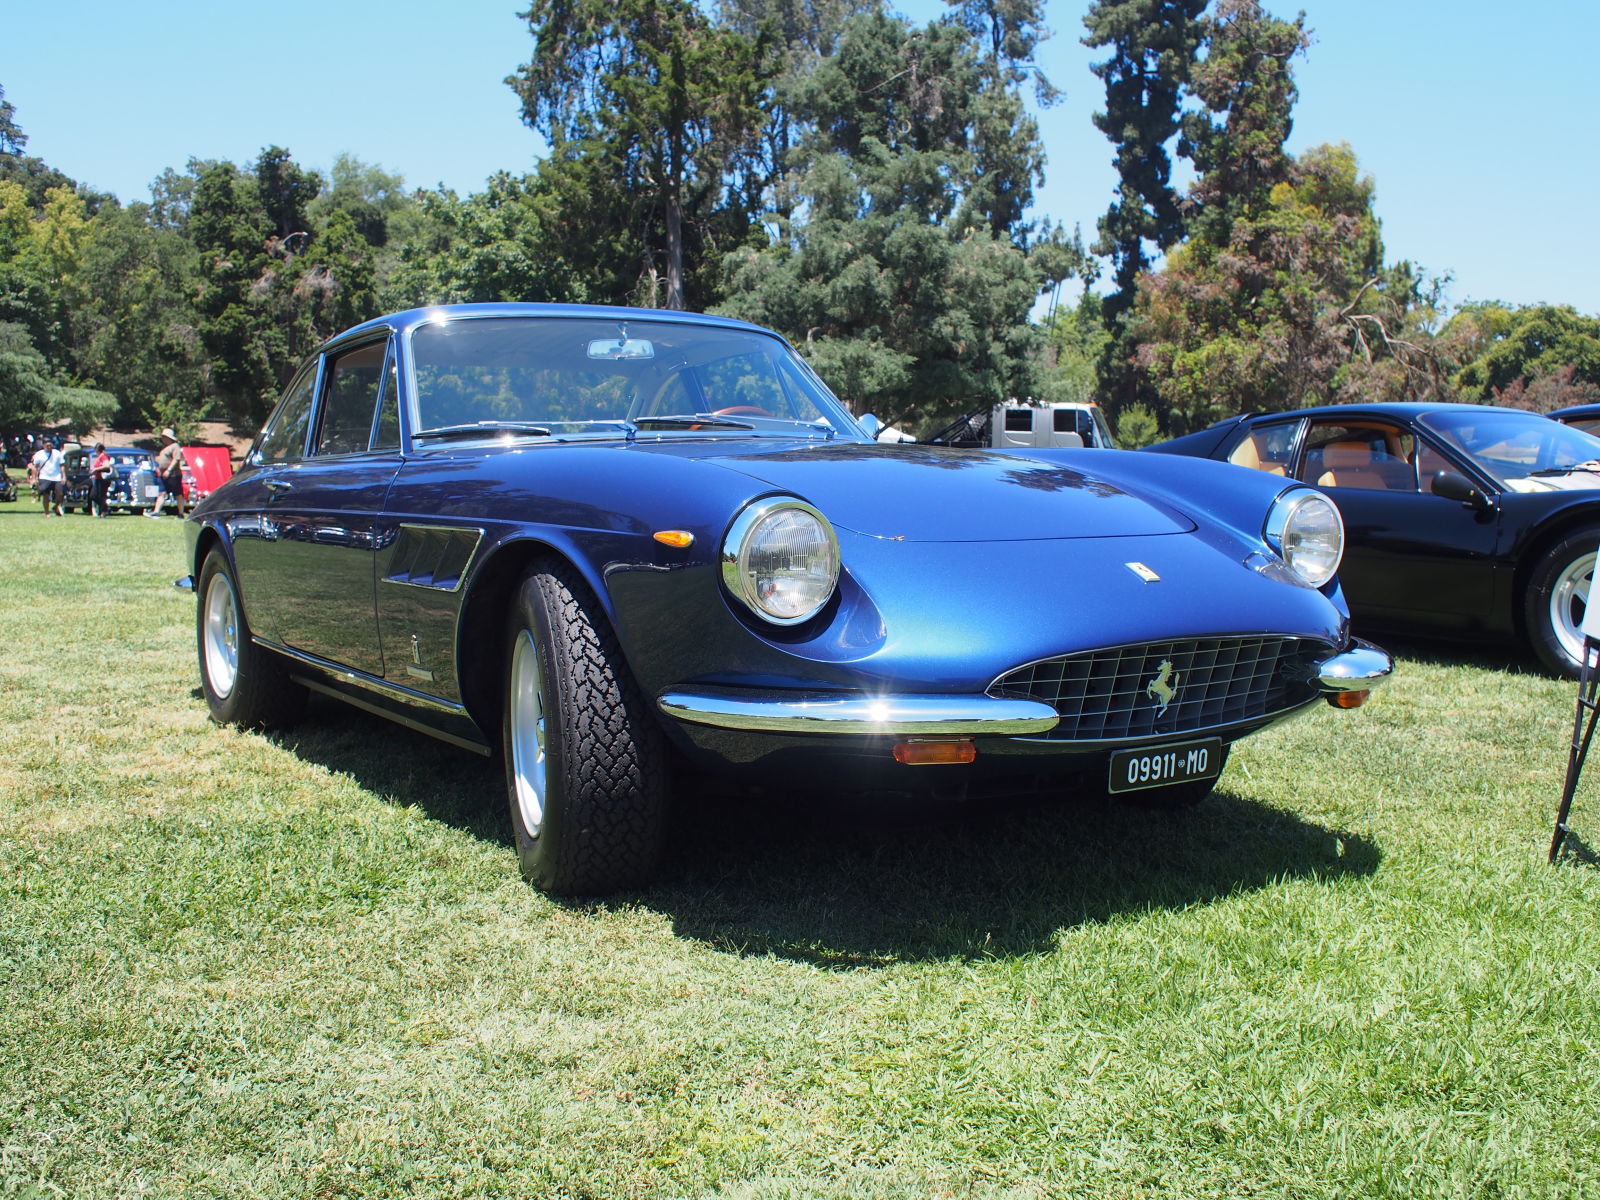 The Ferrari 330 is such a pretty car. This was the most amazing shade of blue.